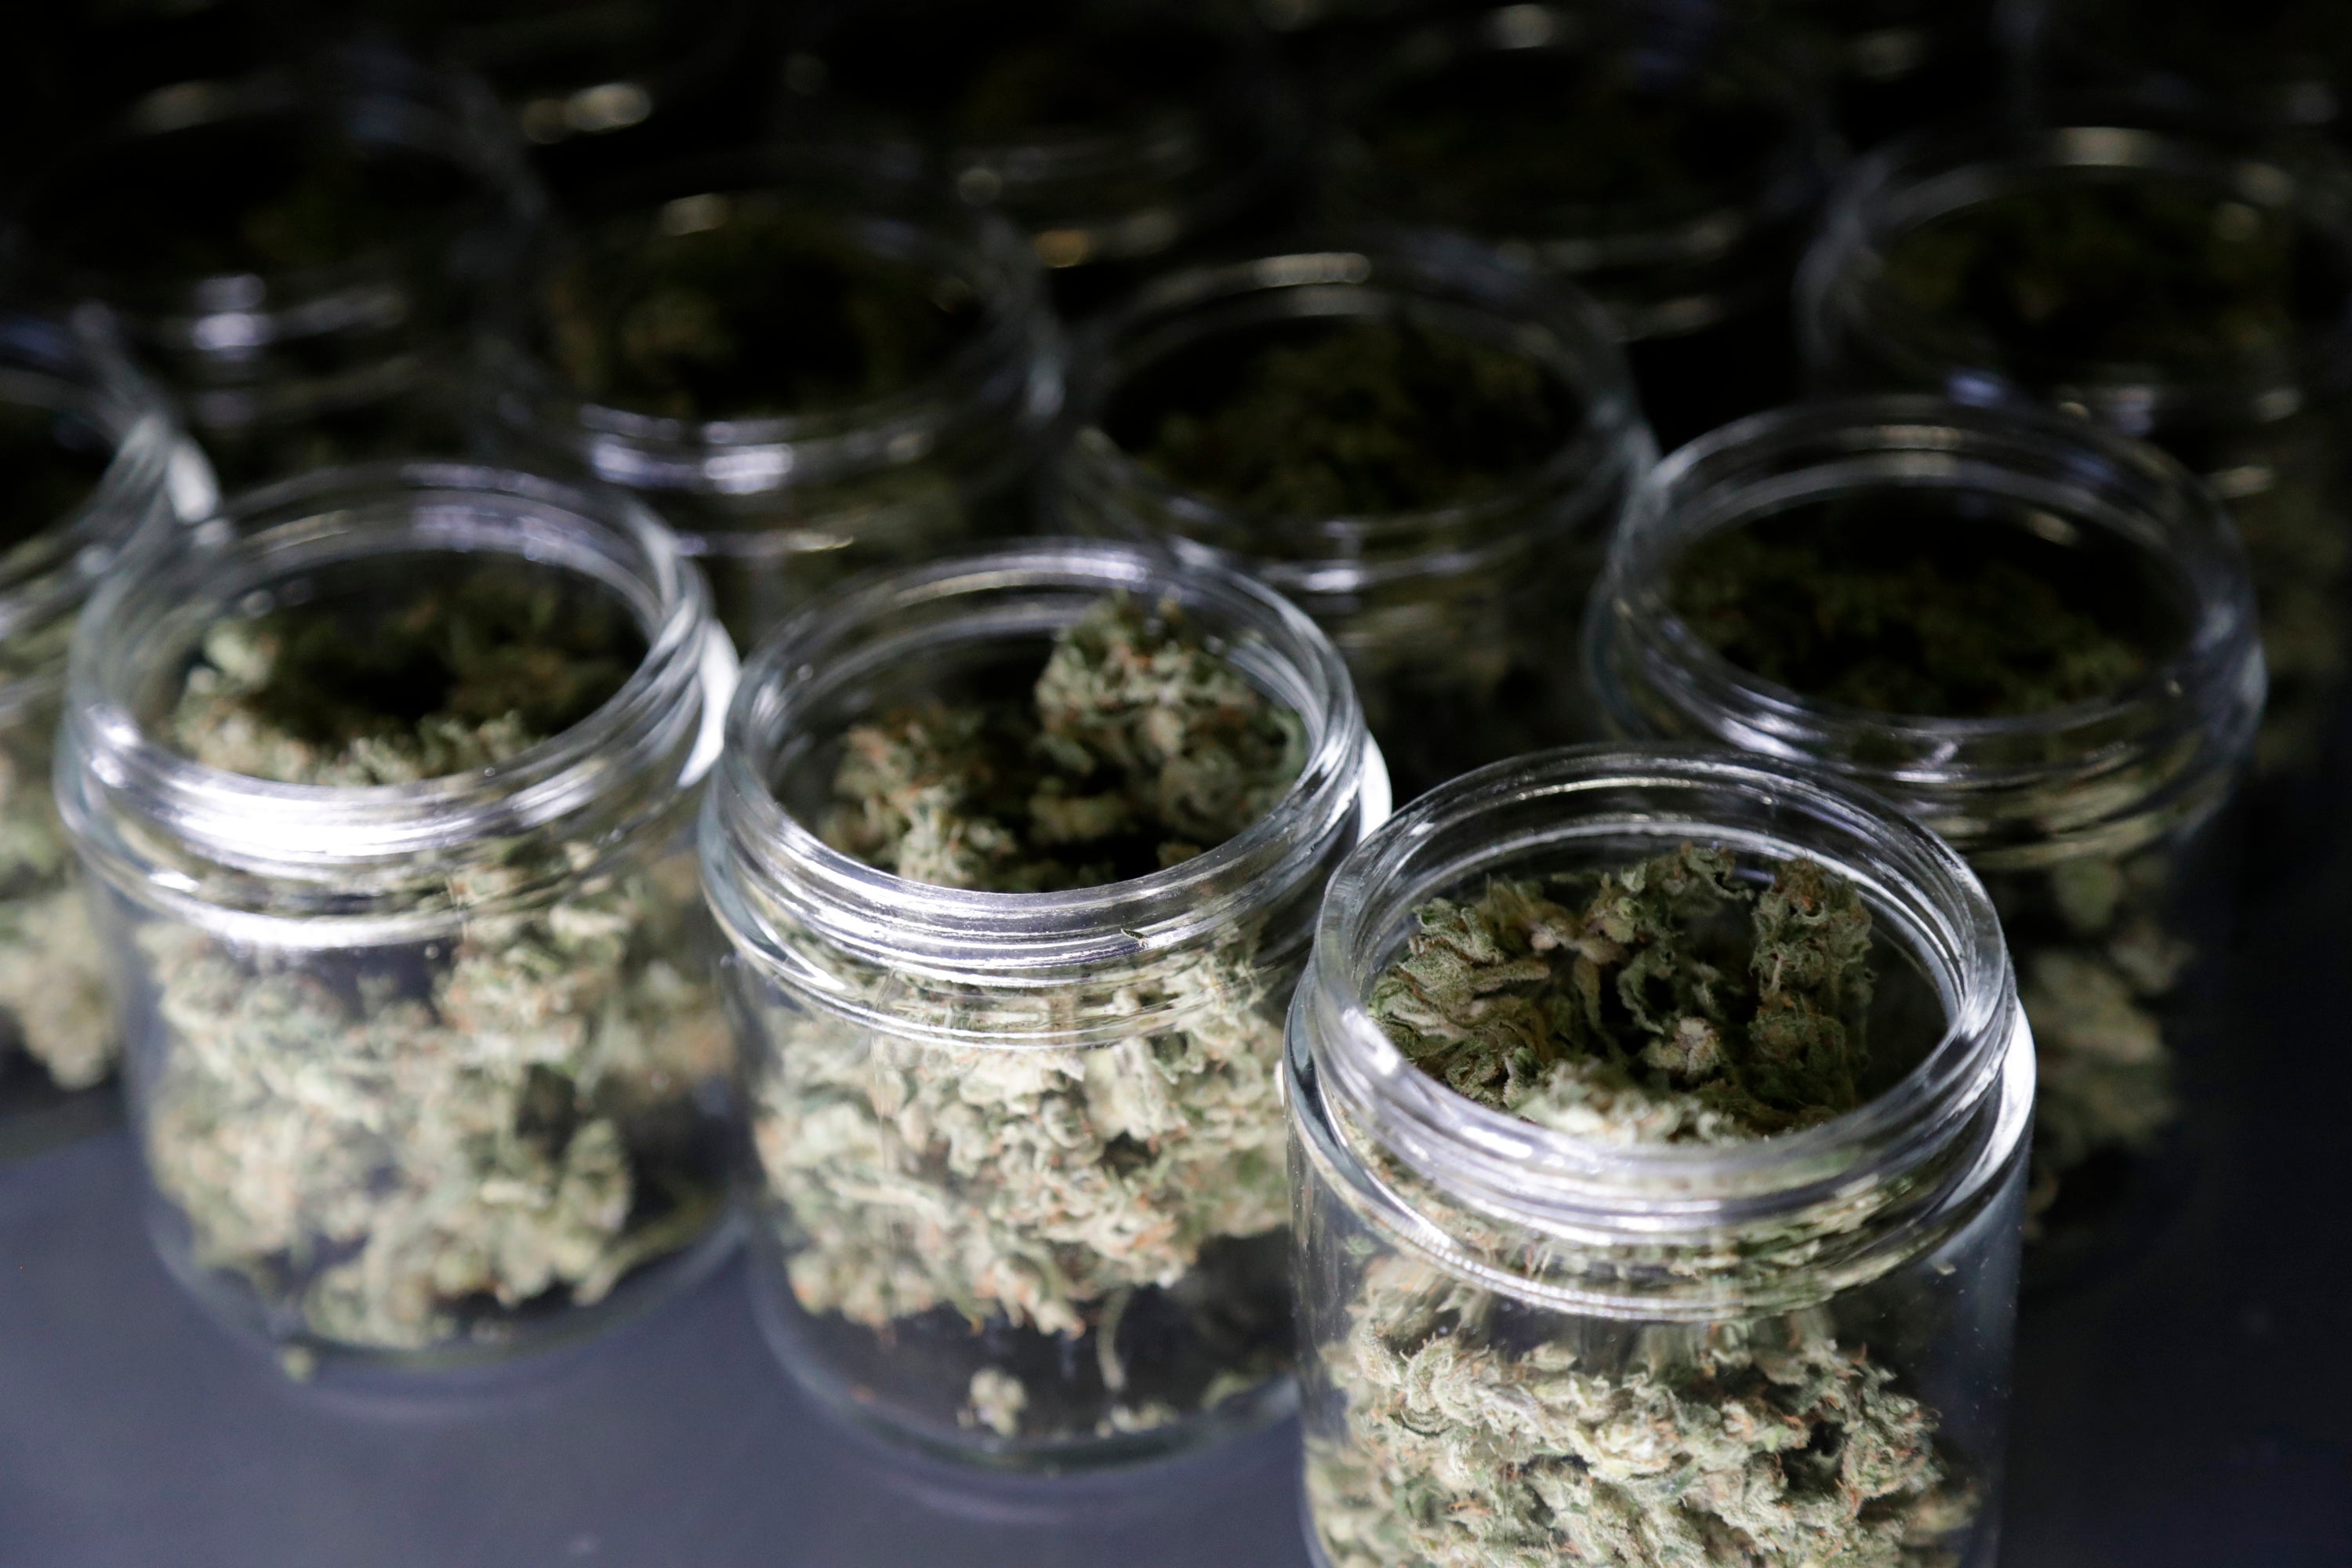 Marijuana buds are seen in a prescription bottle as they are sorted at Compassionate Care Foundation's grow house